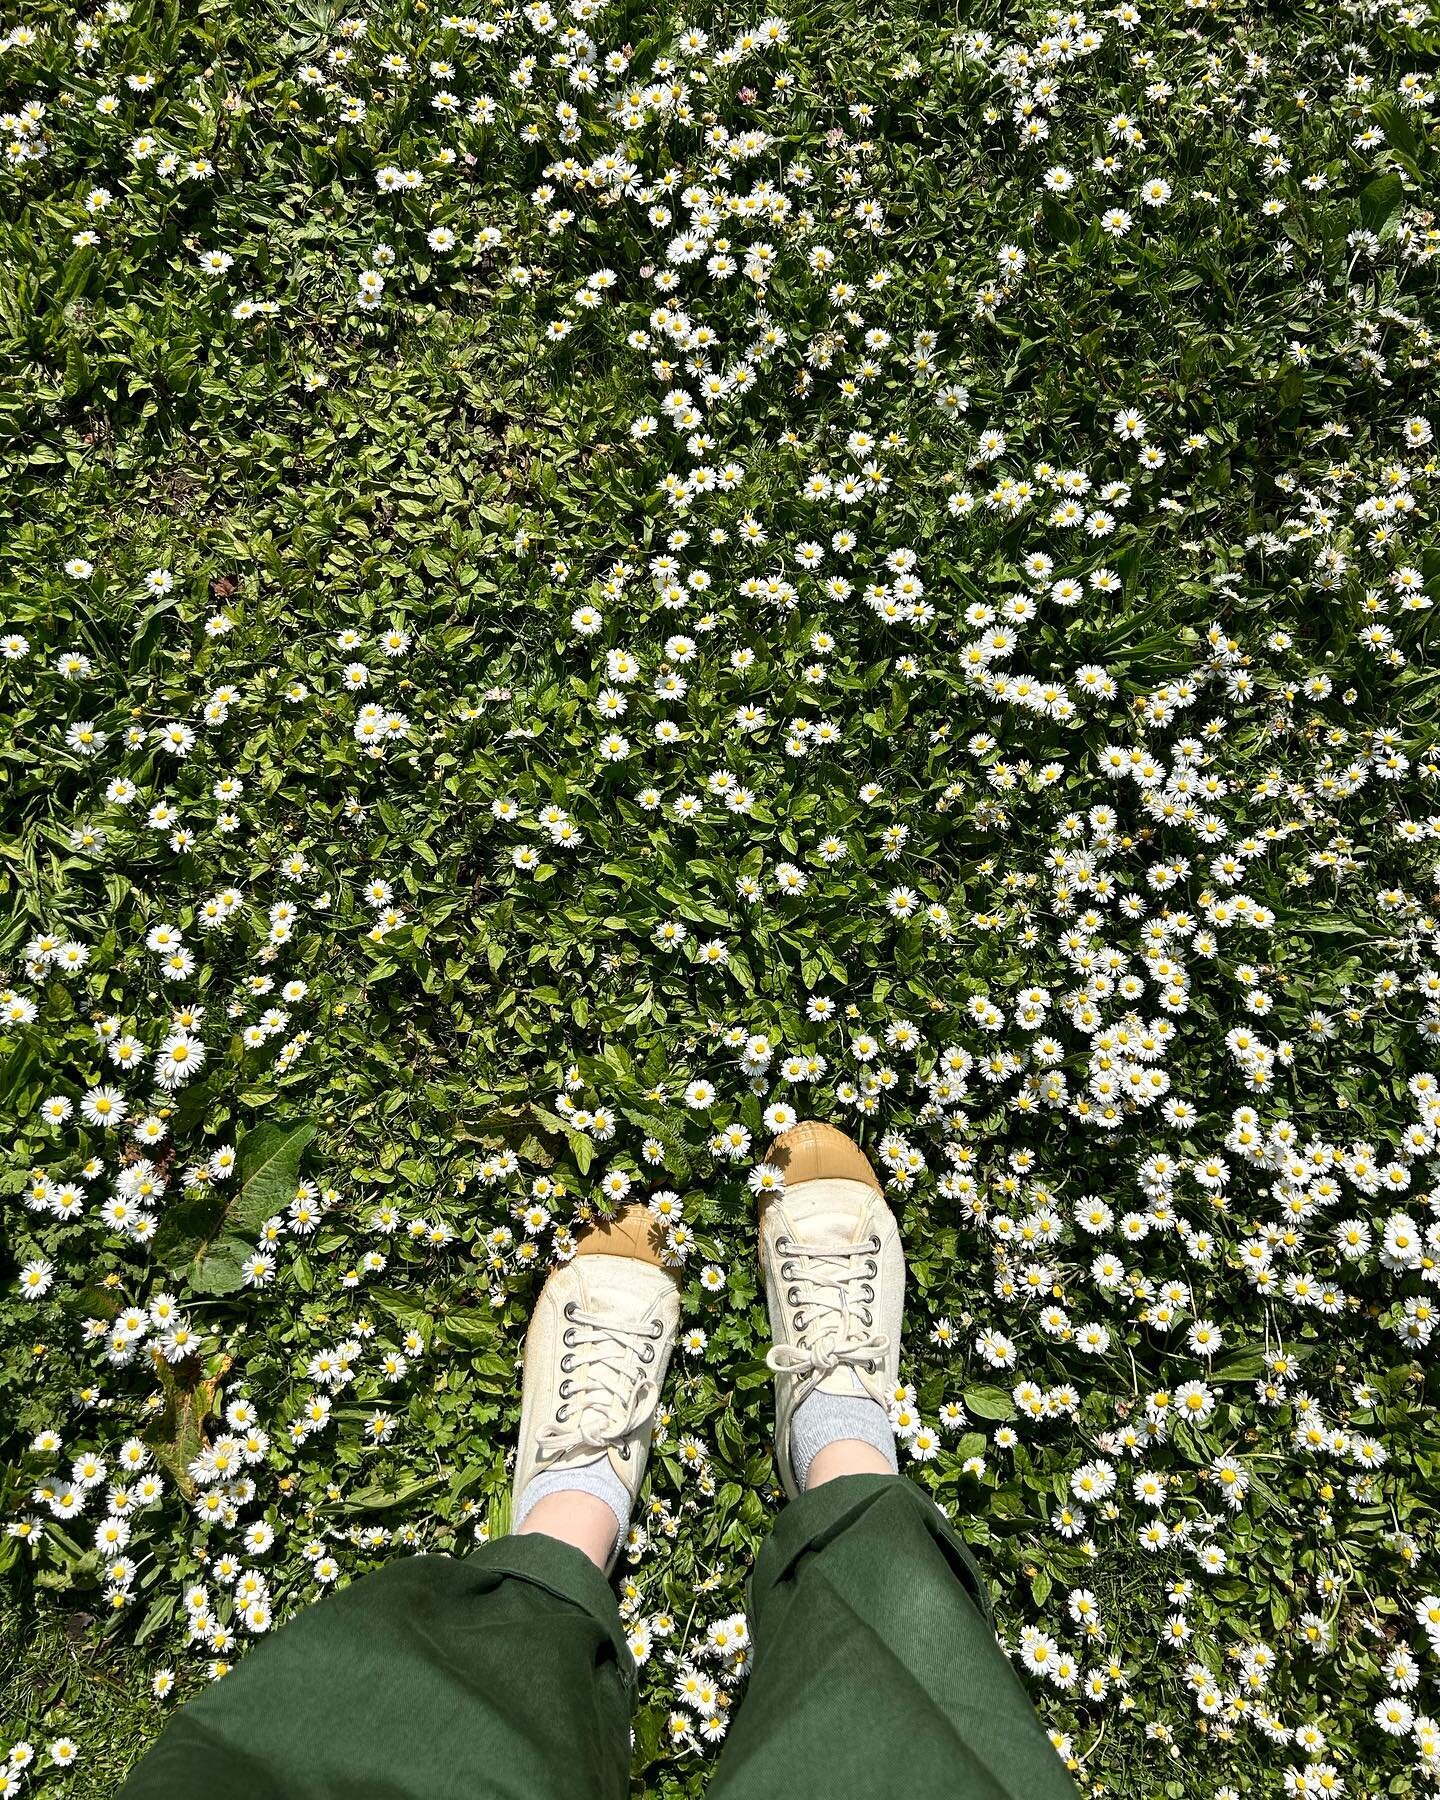 Still on the fence about how I feel about bank holidays. Less paid work, more unpaid work 🤷🏼&zwj;♀️

But this weekend was pretty lovely all round. 

[image description] feet in cream trainers and green trousers on green grass covered in daisies